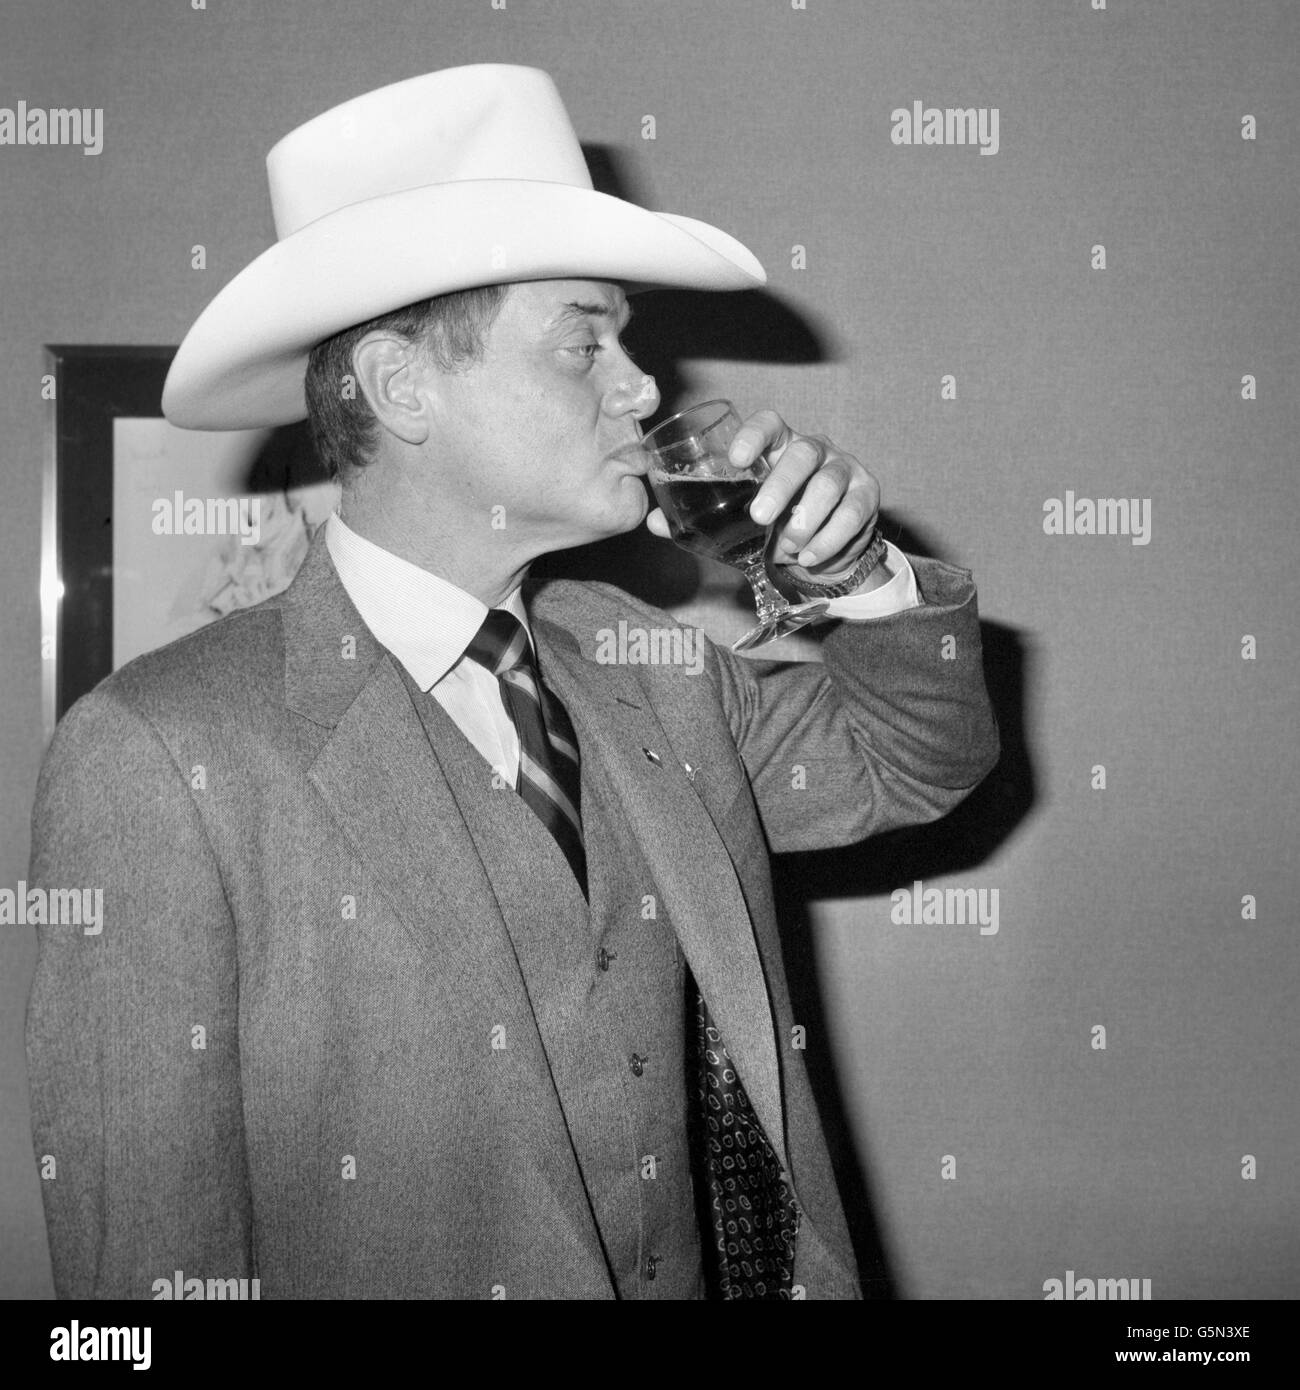 Actor Larry Hagman enjoys a beer at BBC TV Centre in White City, where he is due to appear on Terry Wogan's chat show. Stock Photo